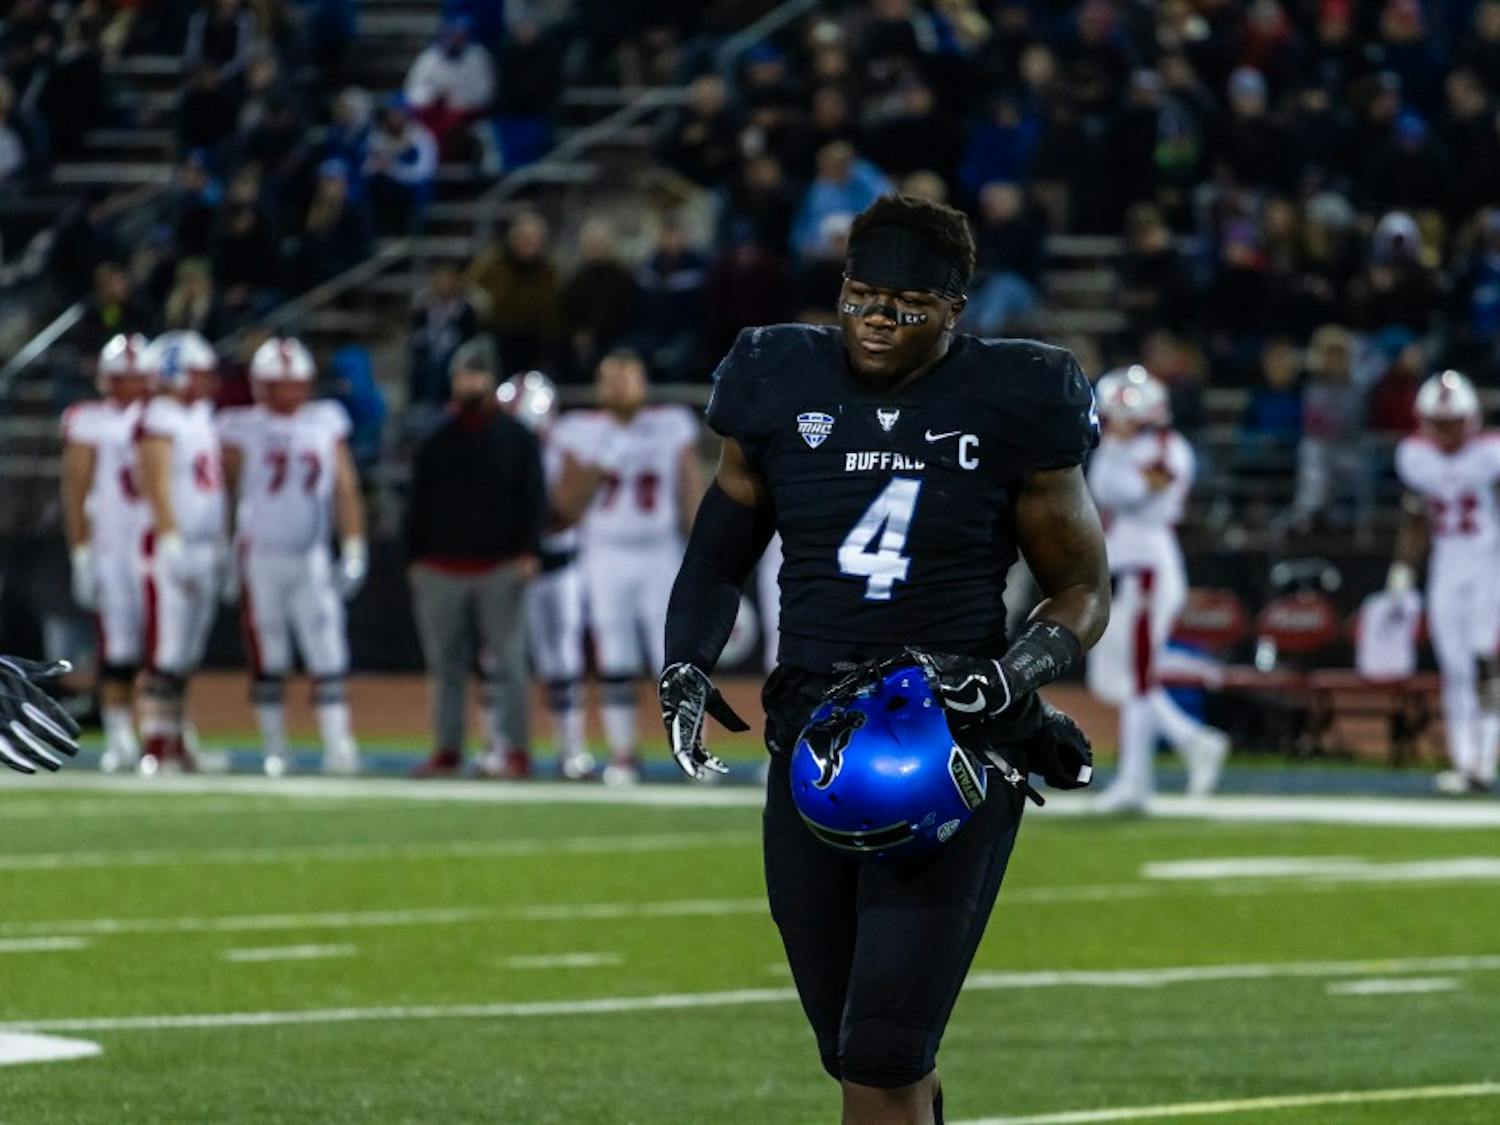 Senior linebacker Khalil Hodge walks toward the sidelines after a targeting penalty. Hodge will miss the first half of the game against Kent State due to the penalty.&nbsp;